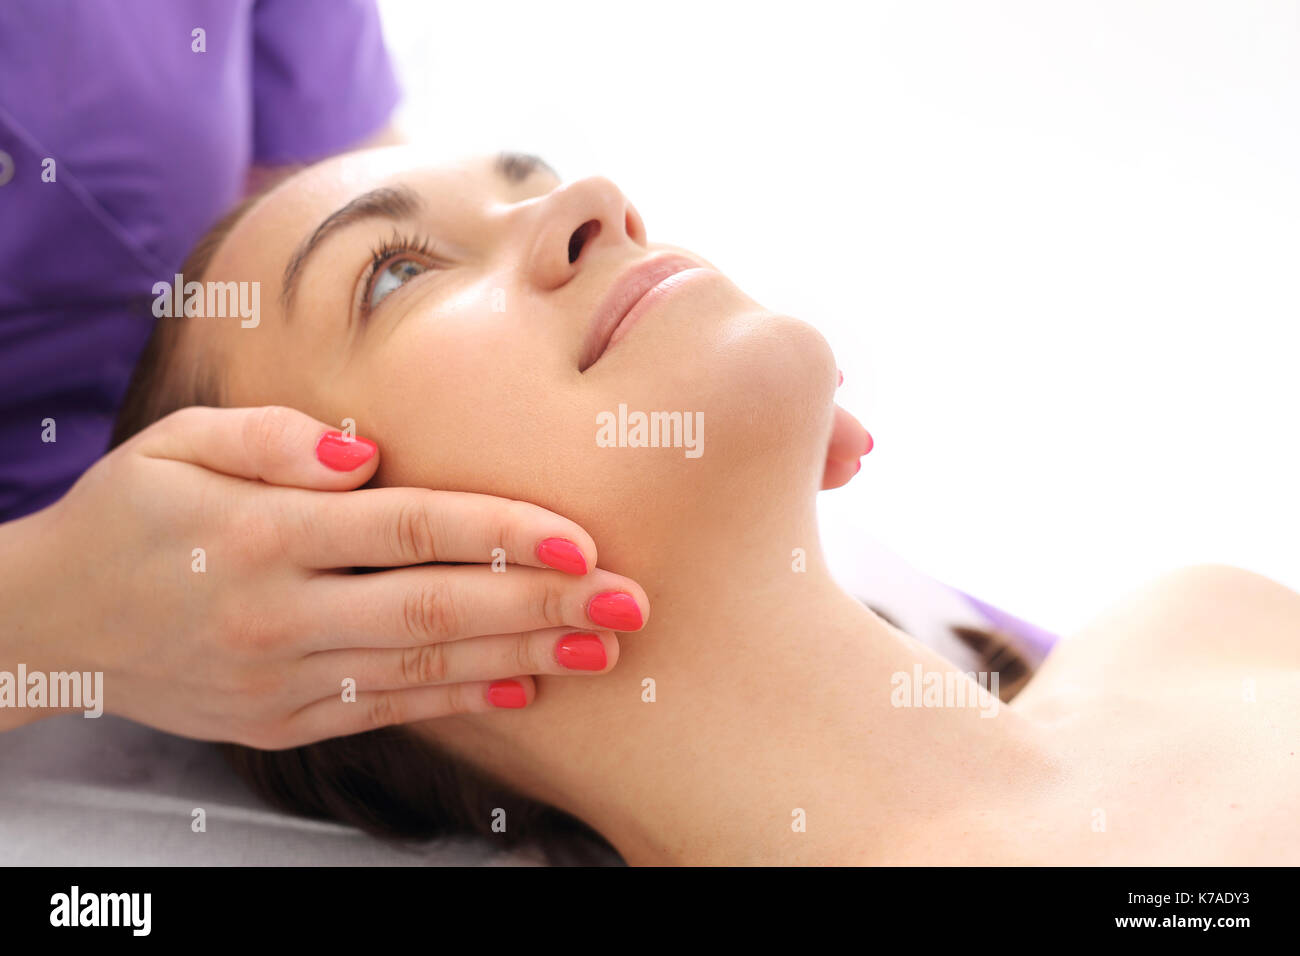 Professional face massage. Woman in beauty parlor during facial massage. Stock Photo